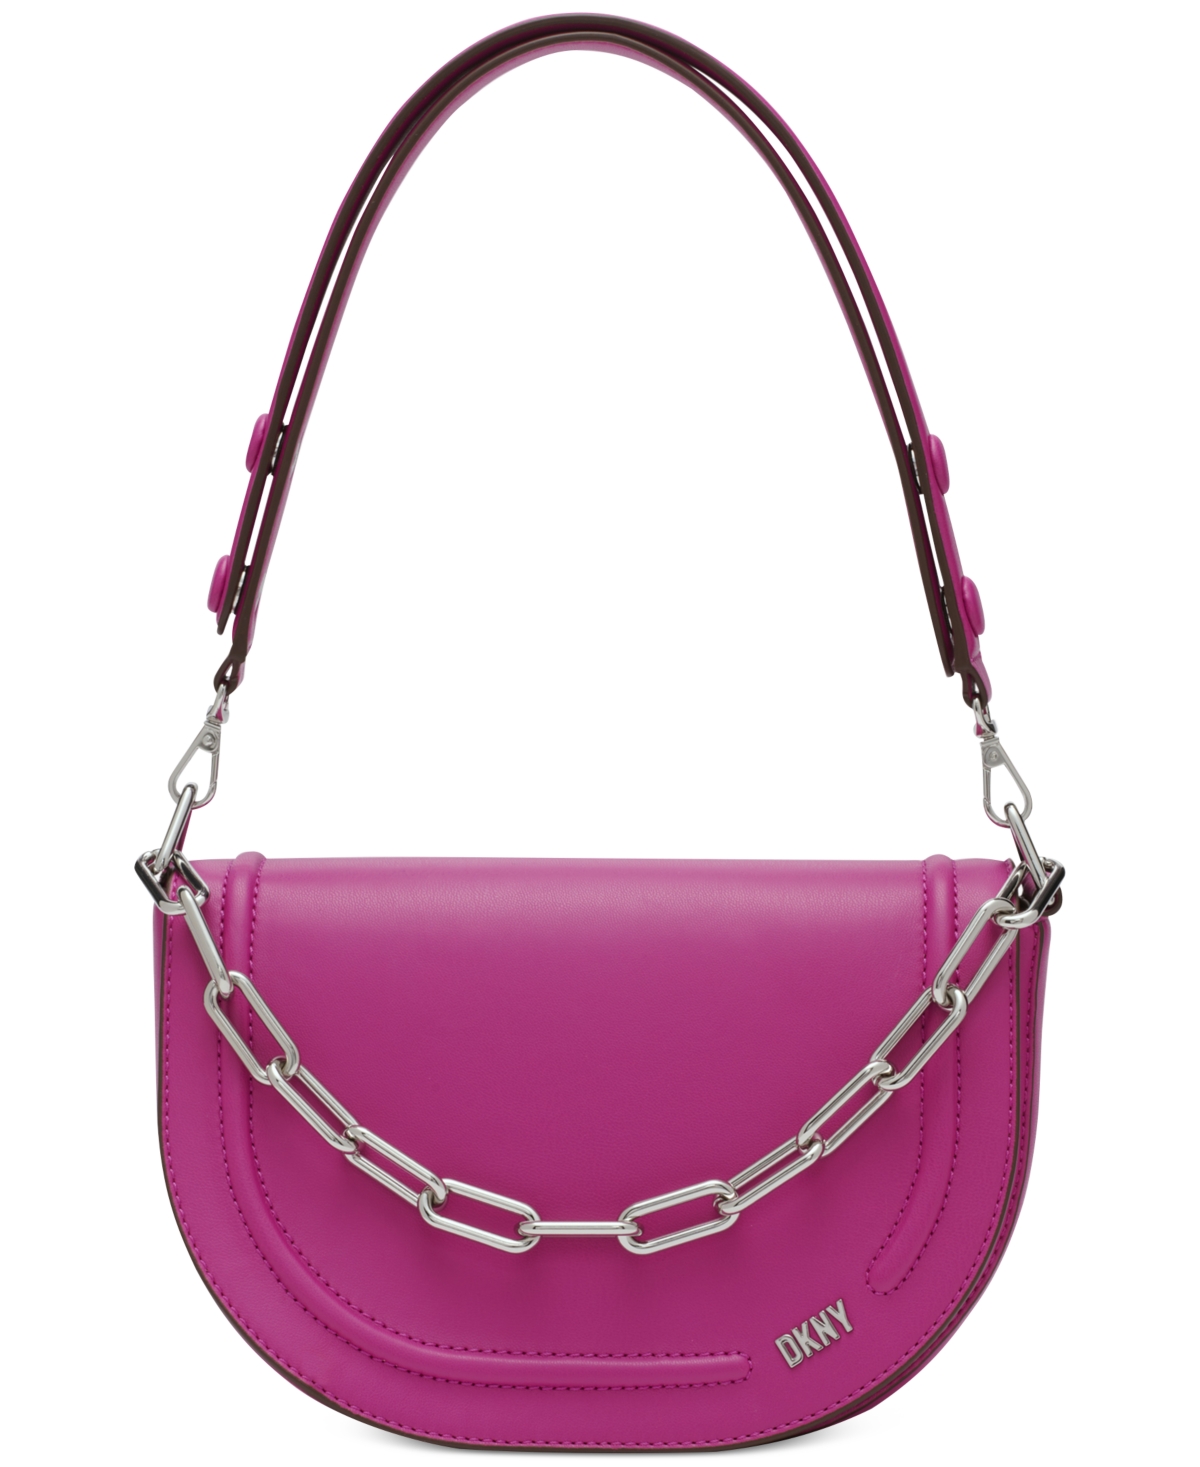 Dkny Orion Convertible Flap Shoulder Bag In Dark Orchid